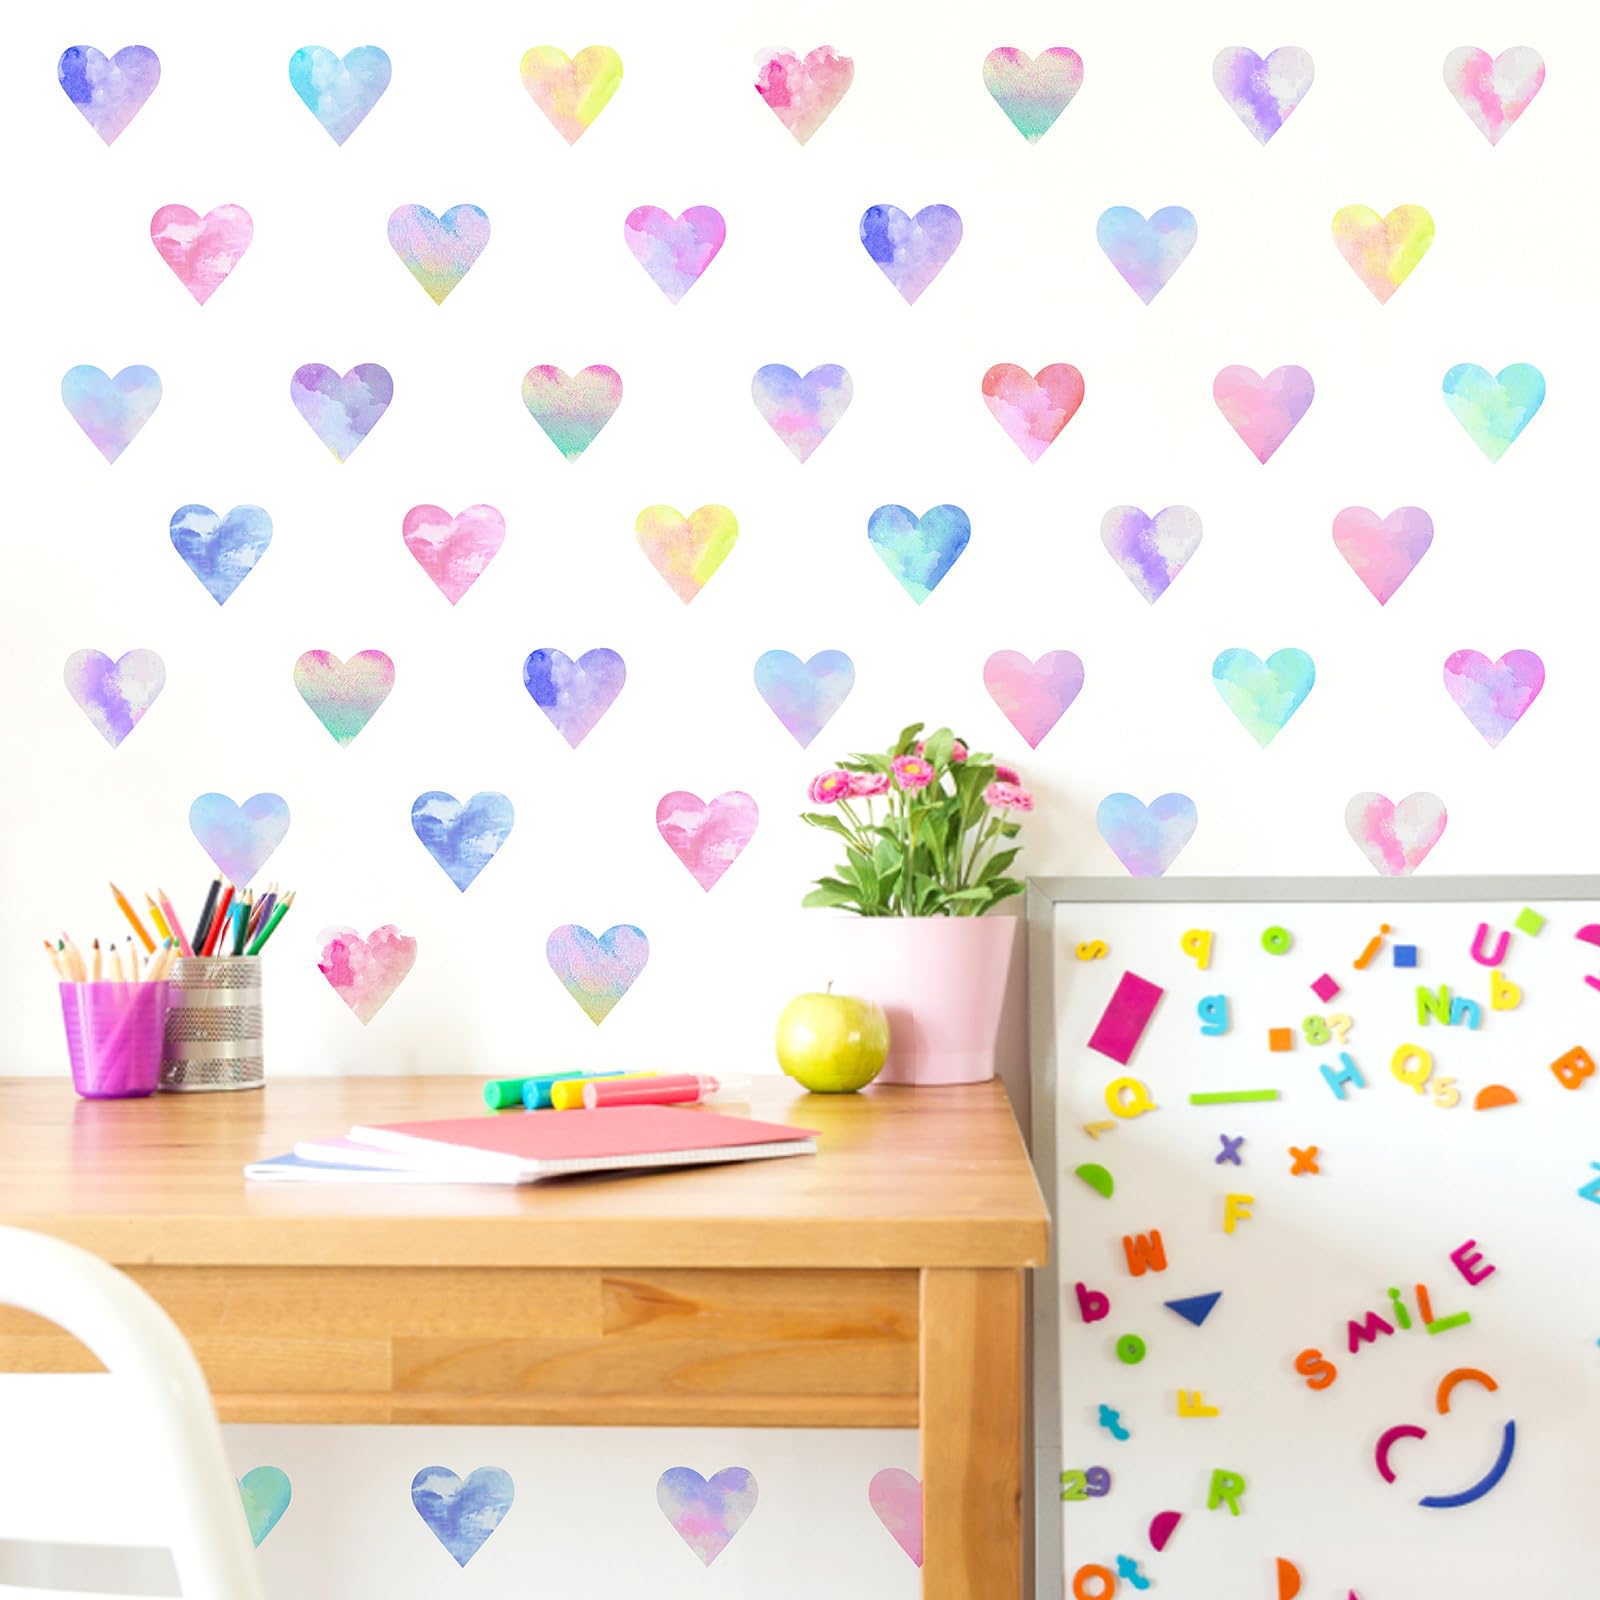 Colorful Heart Wall Decals Peel and Stick Cute Heart Wall Stickers Fabric Wall Stickers Hearts Decals for Walls Watercolor Heart Wall Stickers for Girls Room Bedroom Nursery Decor